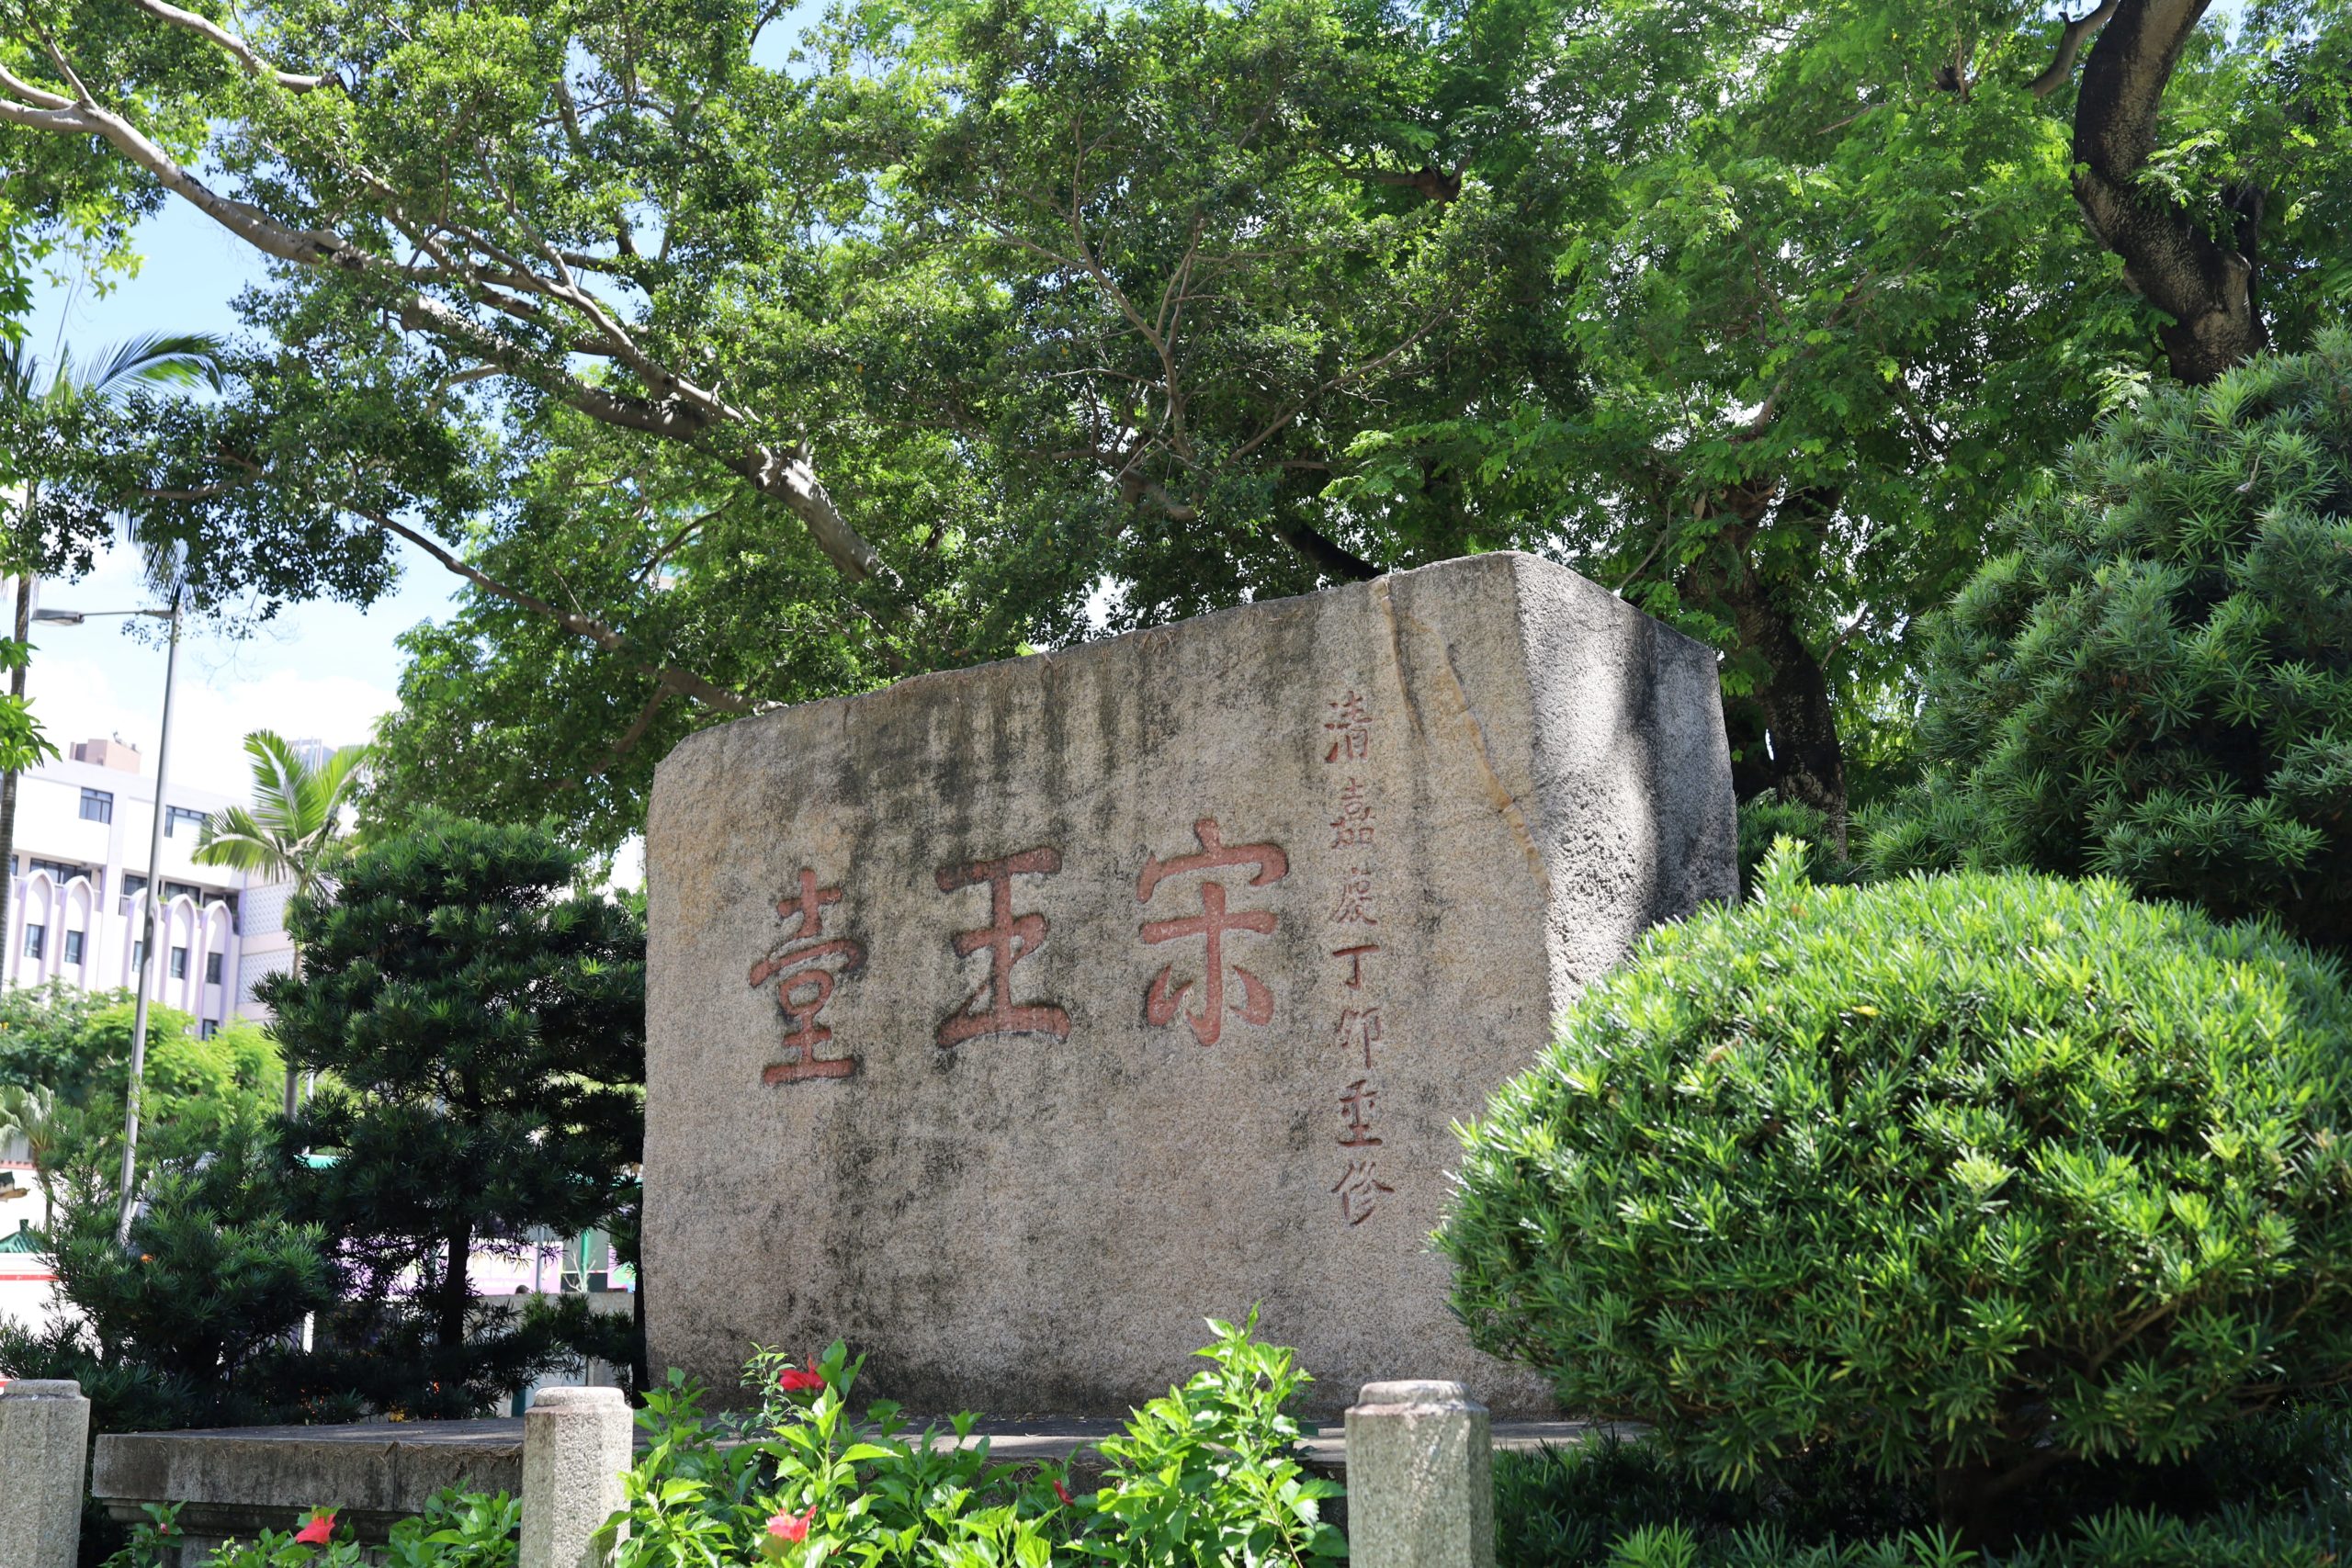 Sung Wong Toi - A Rock Remnant Inscribed With Three Chinese 